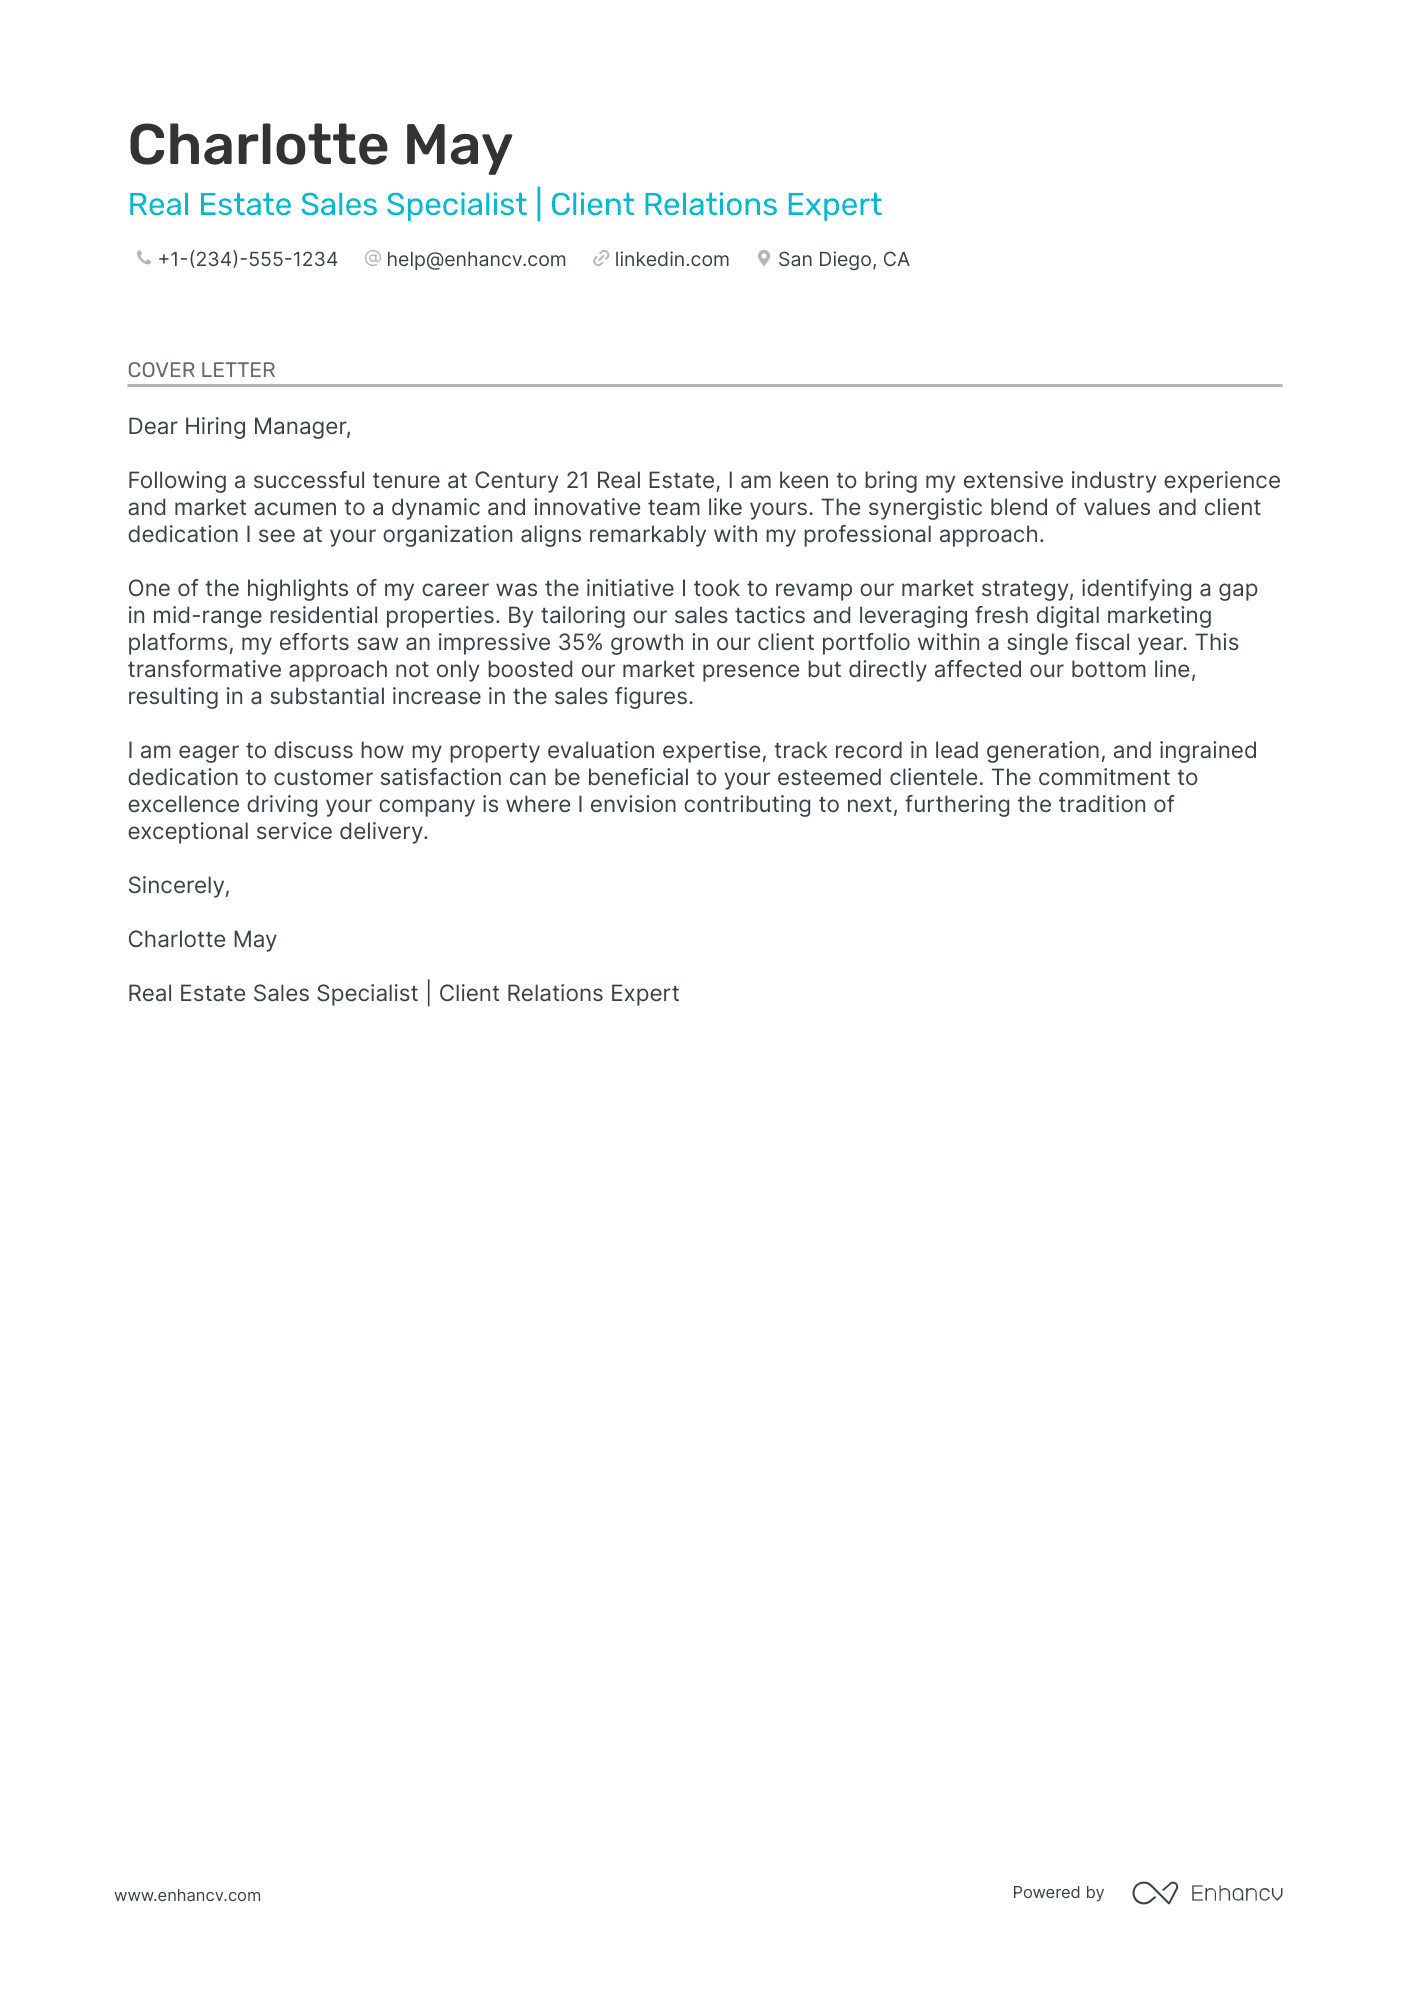 cover letter real estate agent no experience